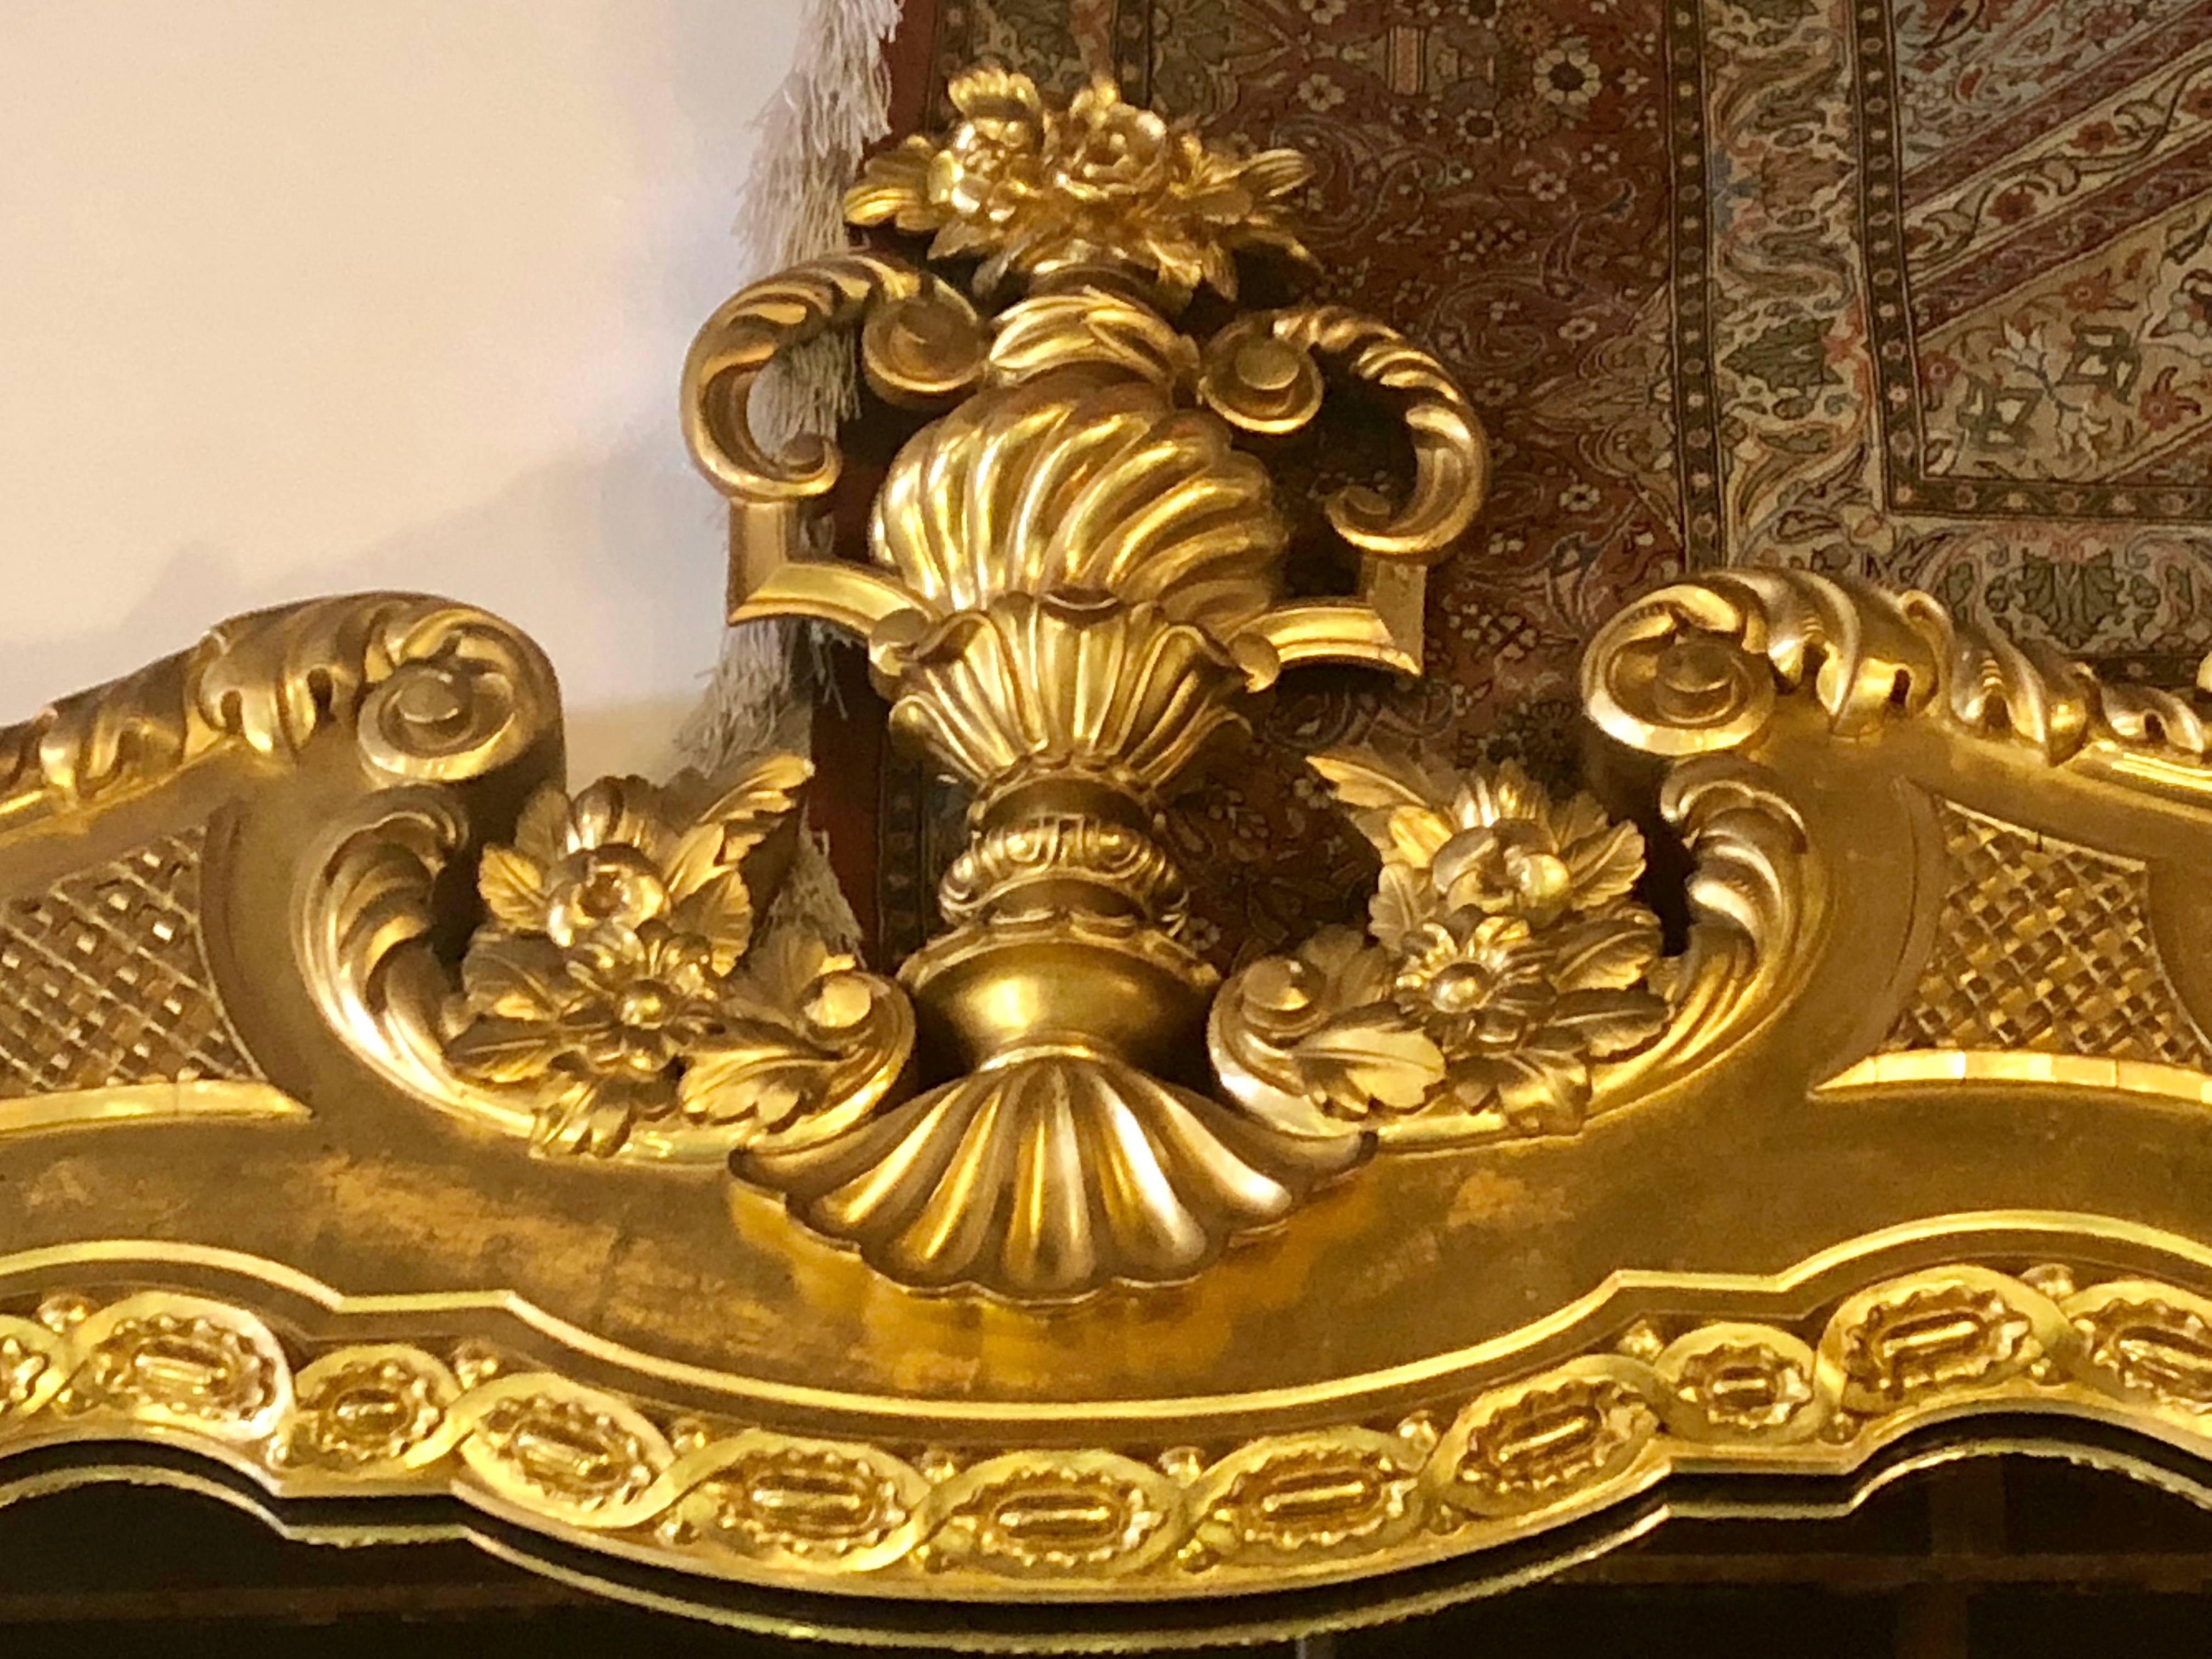 Monumental pair of finely carved 84 x 53 inch Italian console or wall mirrors with flame and floral finial tops. This finely giltwood pair of mirrors have clay undertones and are not only impressive in size but quality as well. Certainly having been